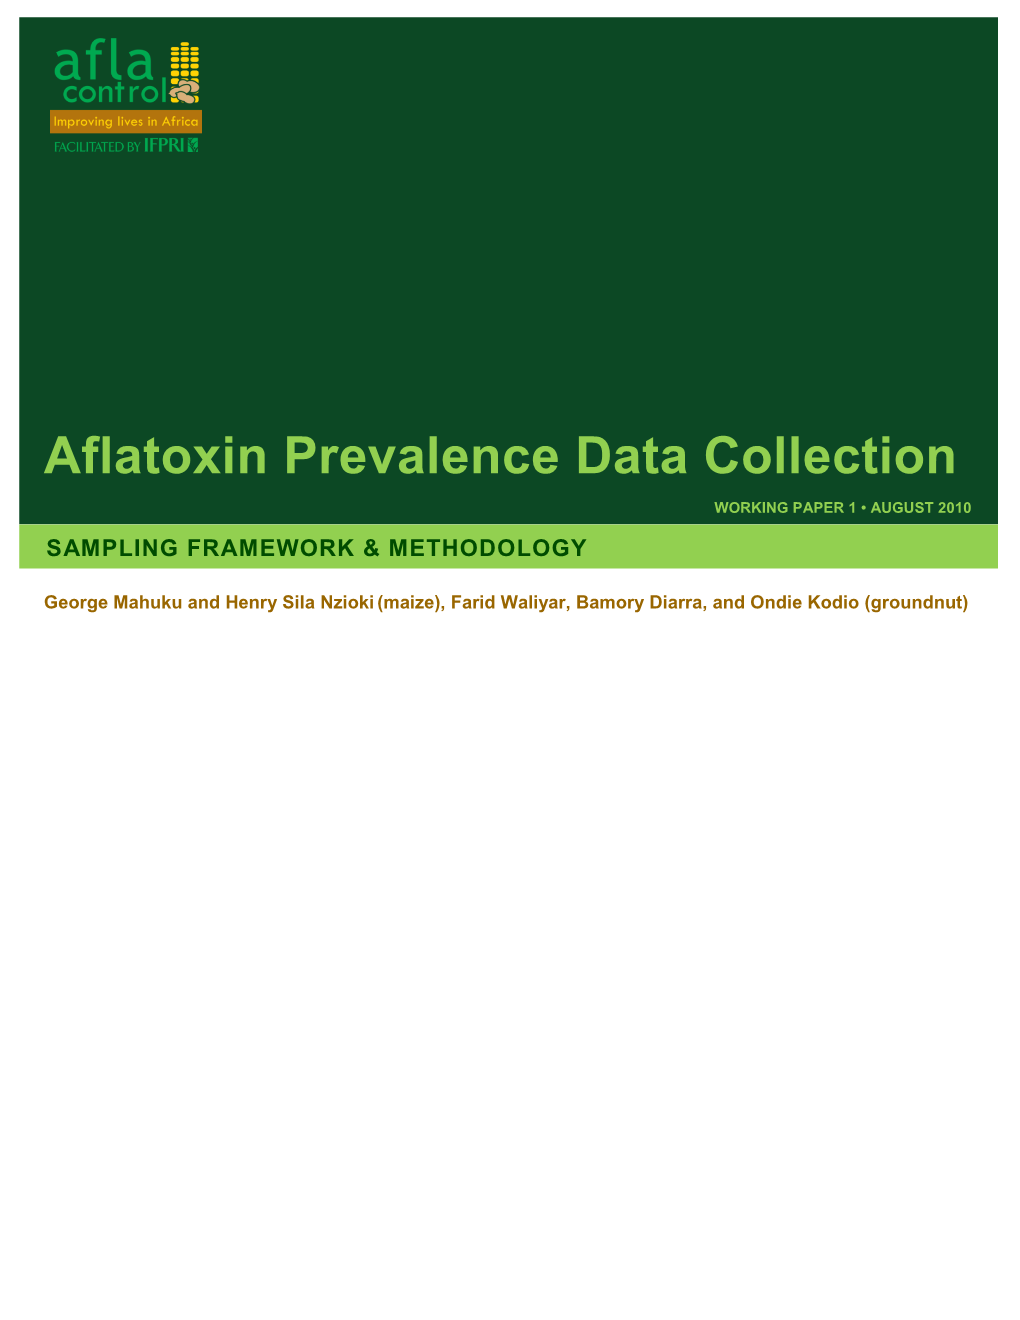 Aflatoxin Prevalence Data Collection WORKING PAPER 1 • AUGUST 2010